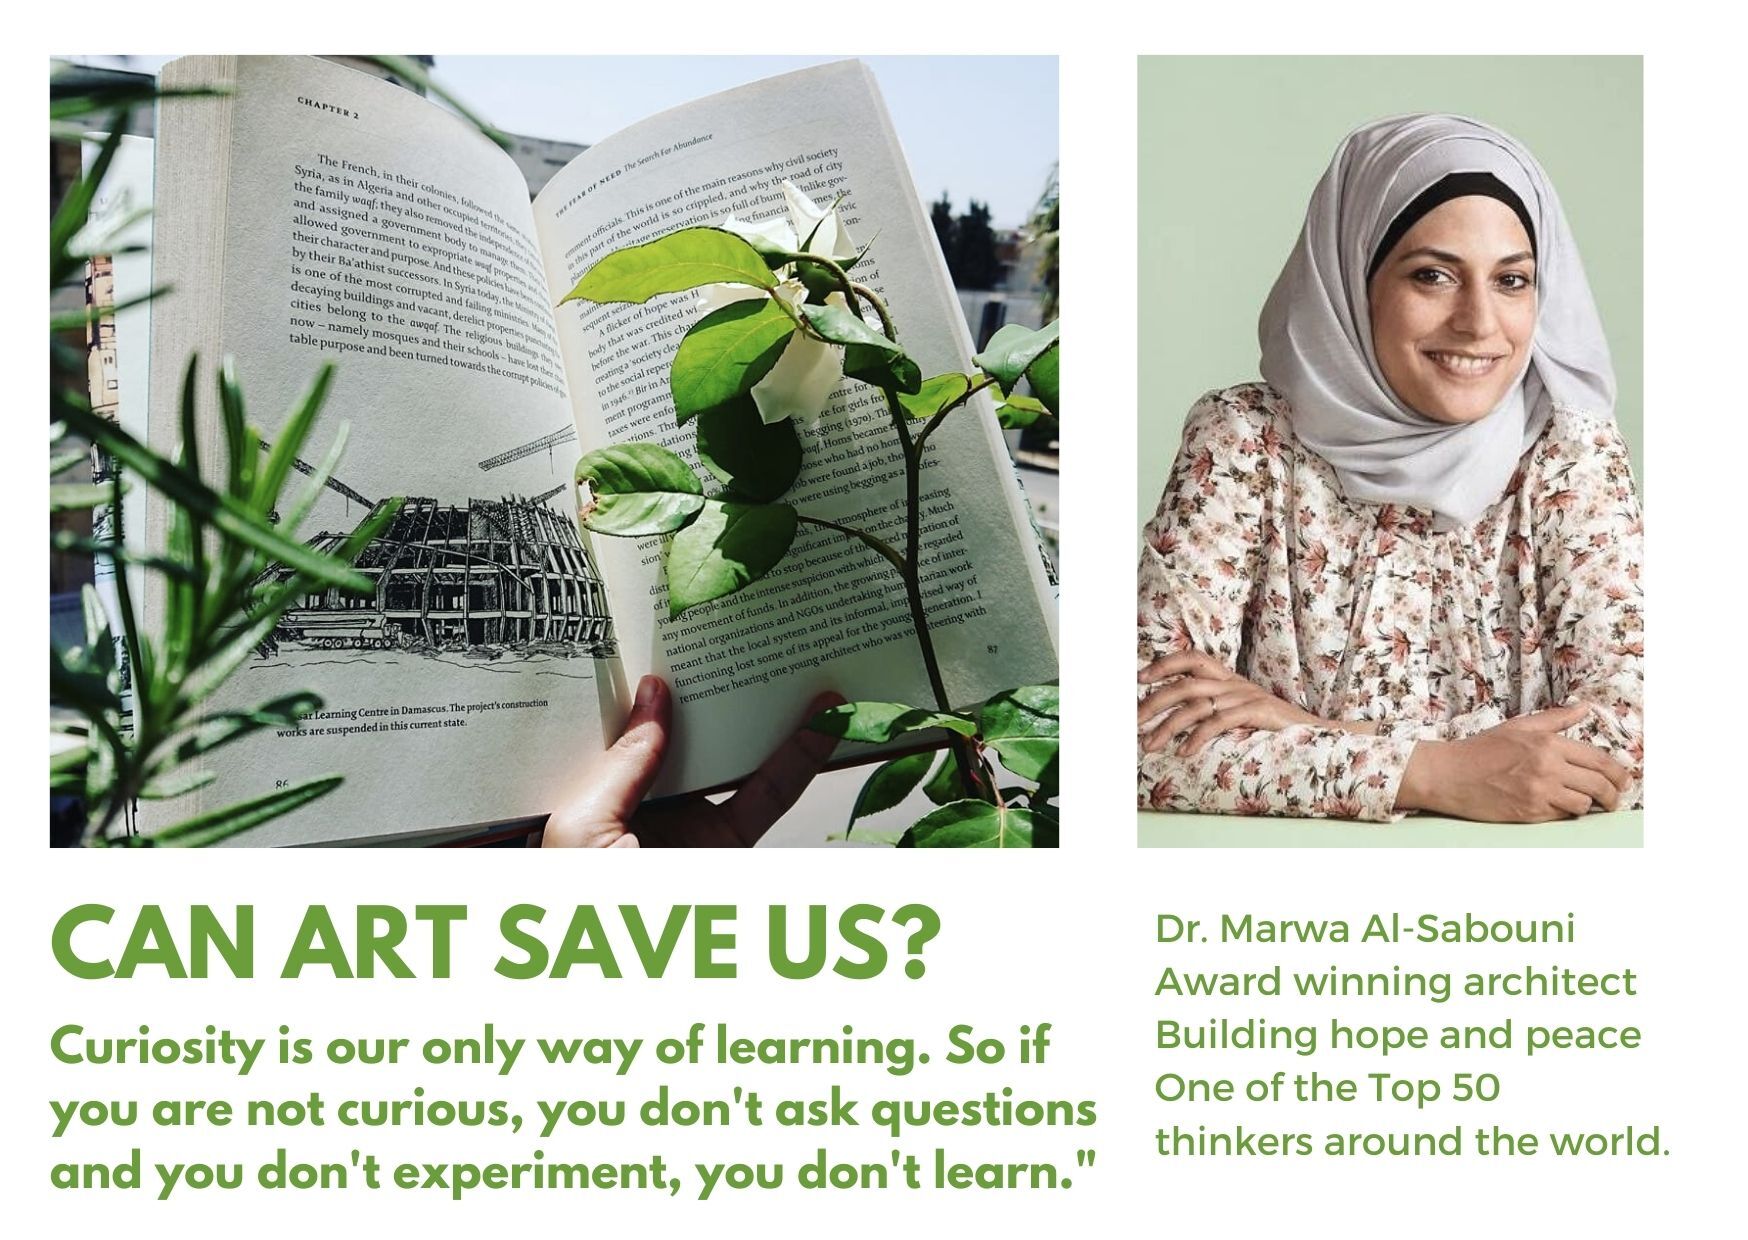 Portrait of Marwa Al Sabouni next to an architecture book, open with natural green leaves on the page.